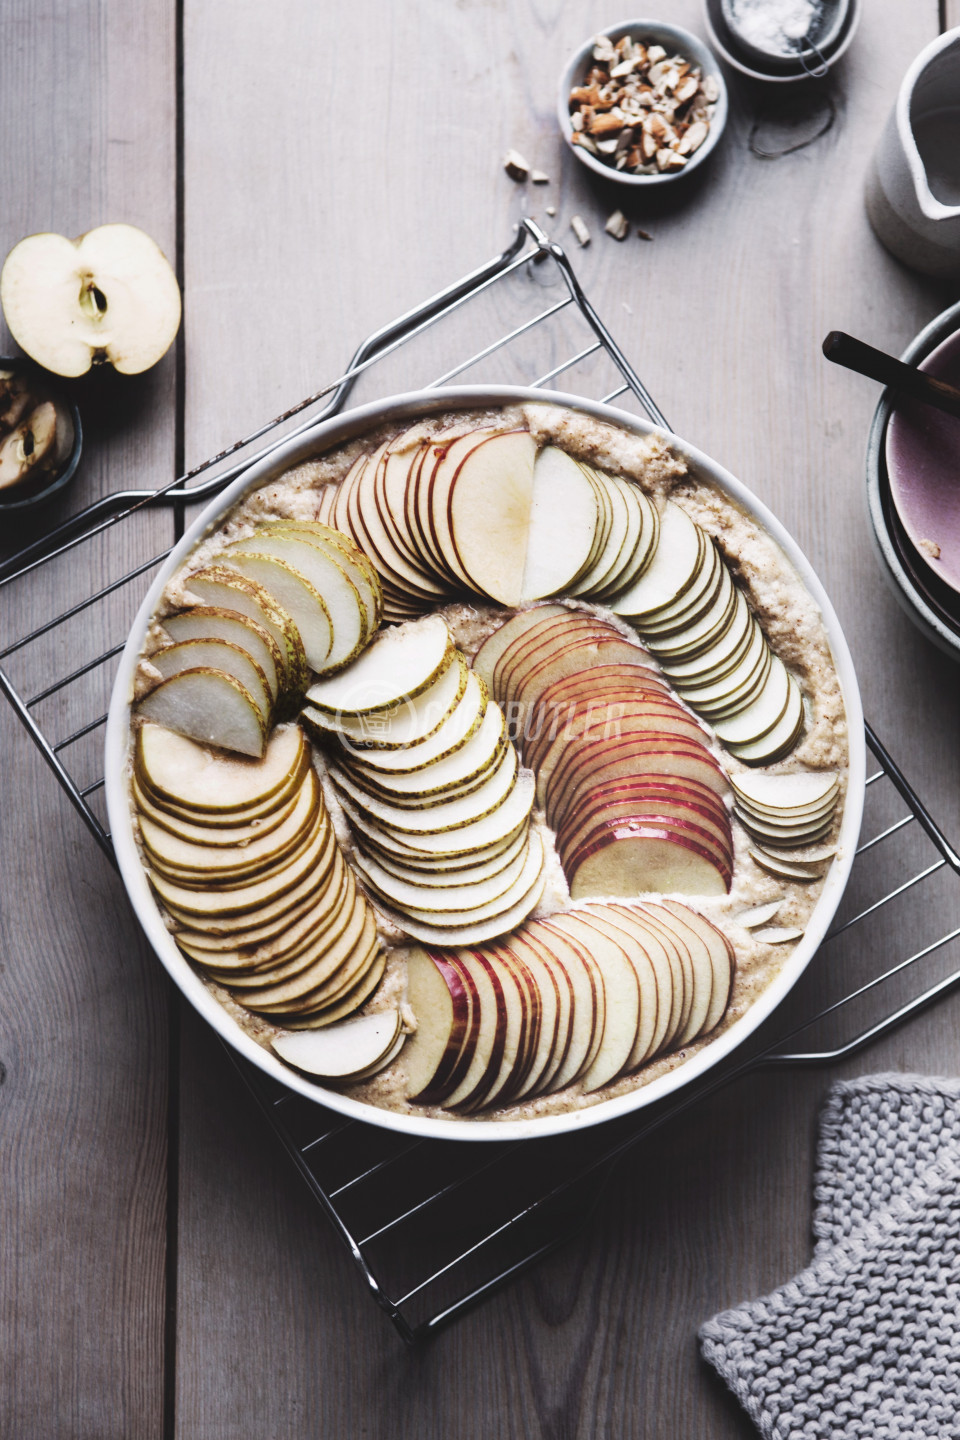 Unbaked paleo vanilla cake with apples and pears | preview